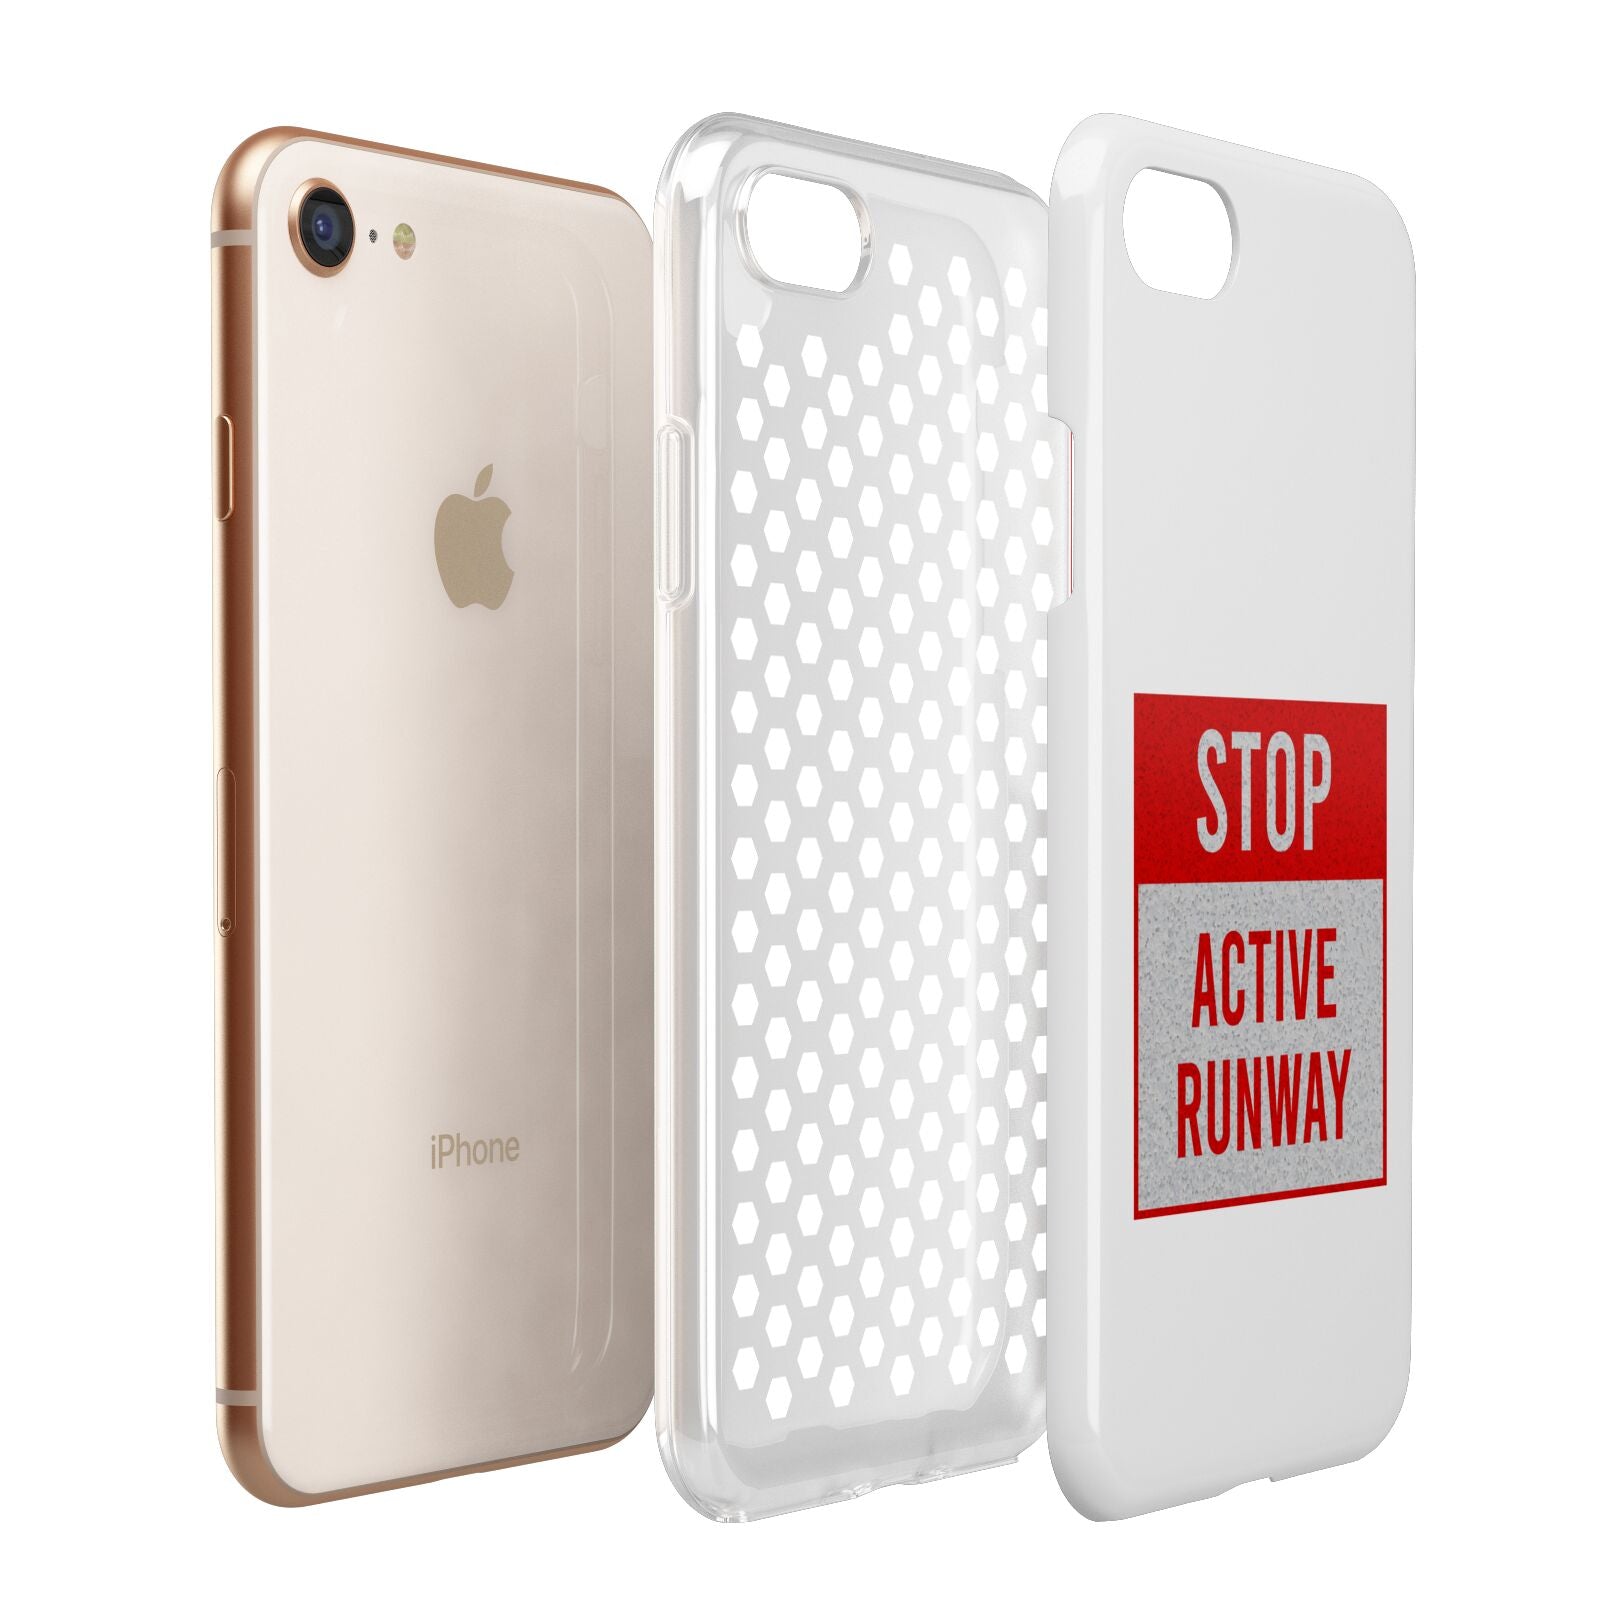 Stop Active Runway Apple iPhone 7 8 3D Tough Case Expanded View